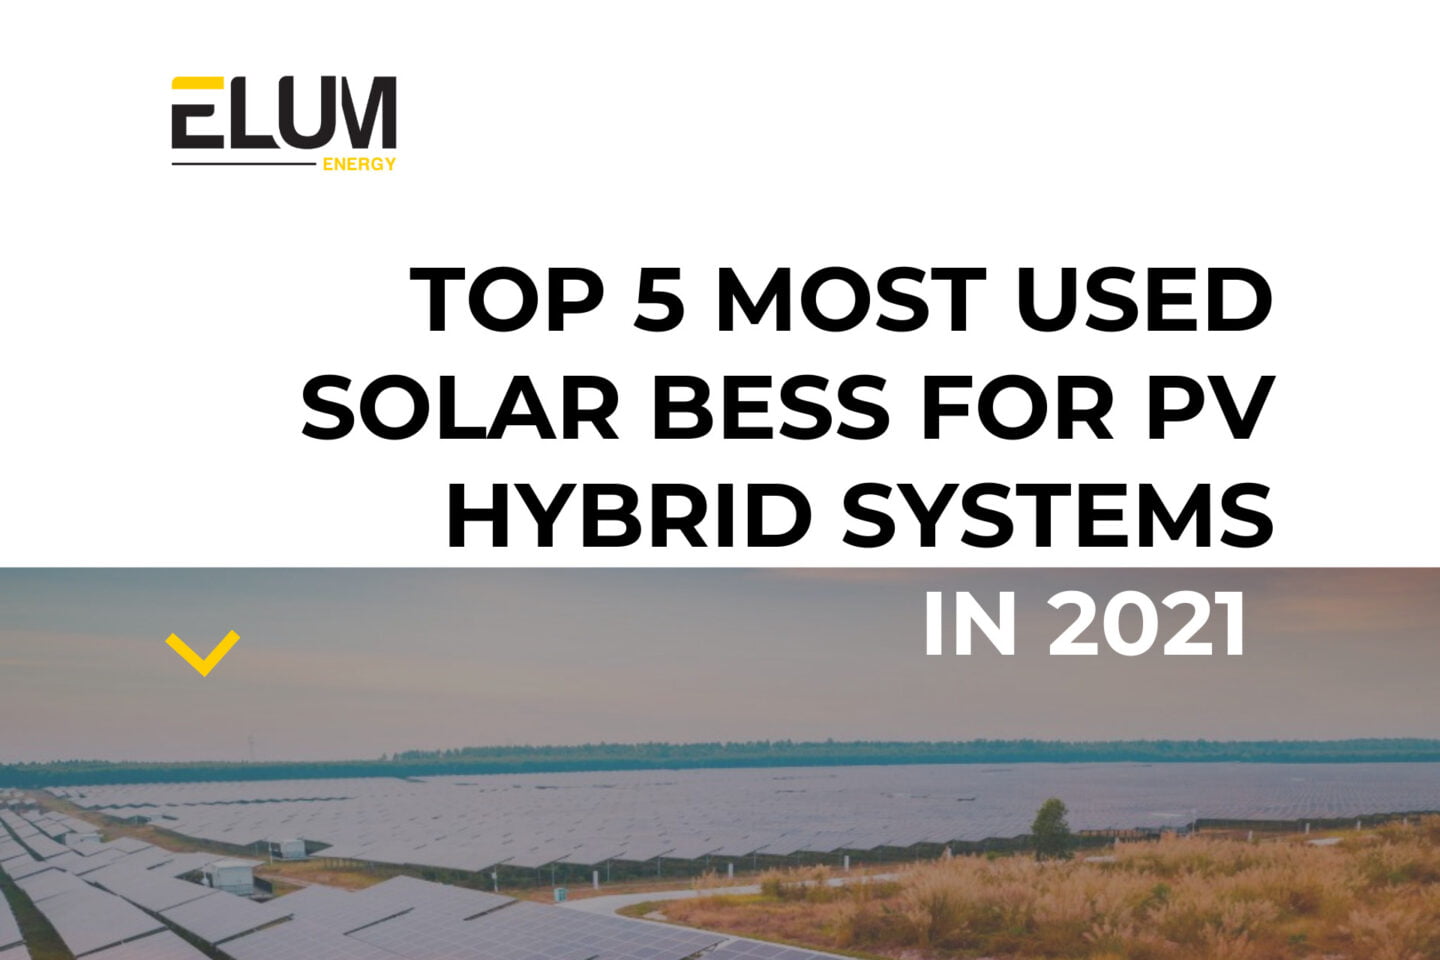 Top 5 most used solar BESS for PV hybrid systems in 2021